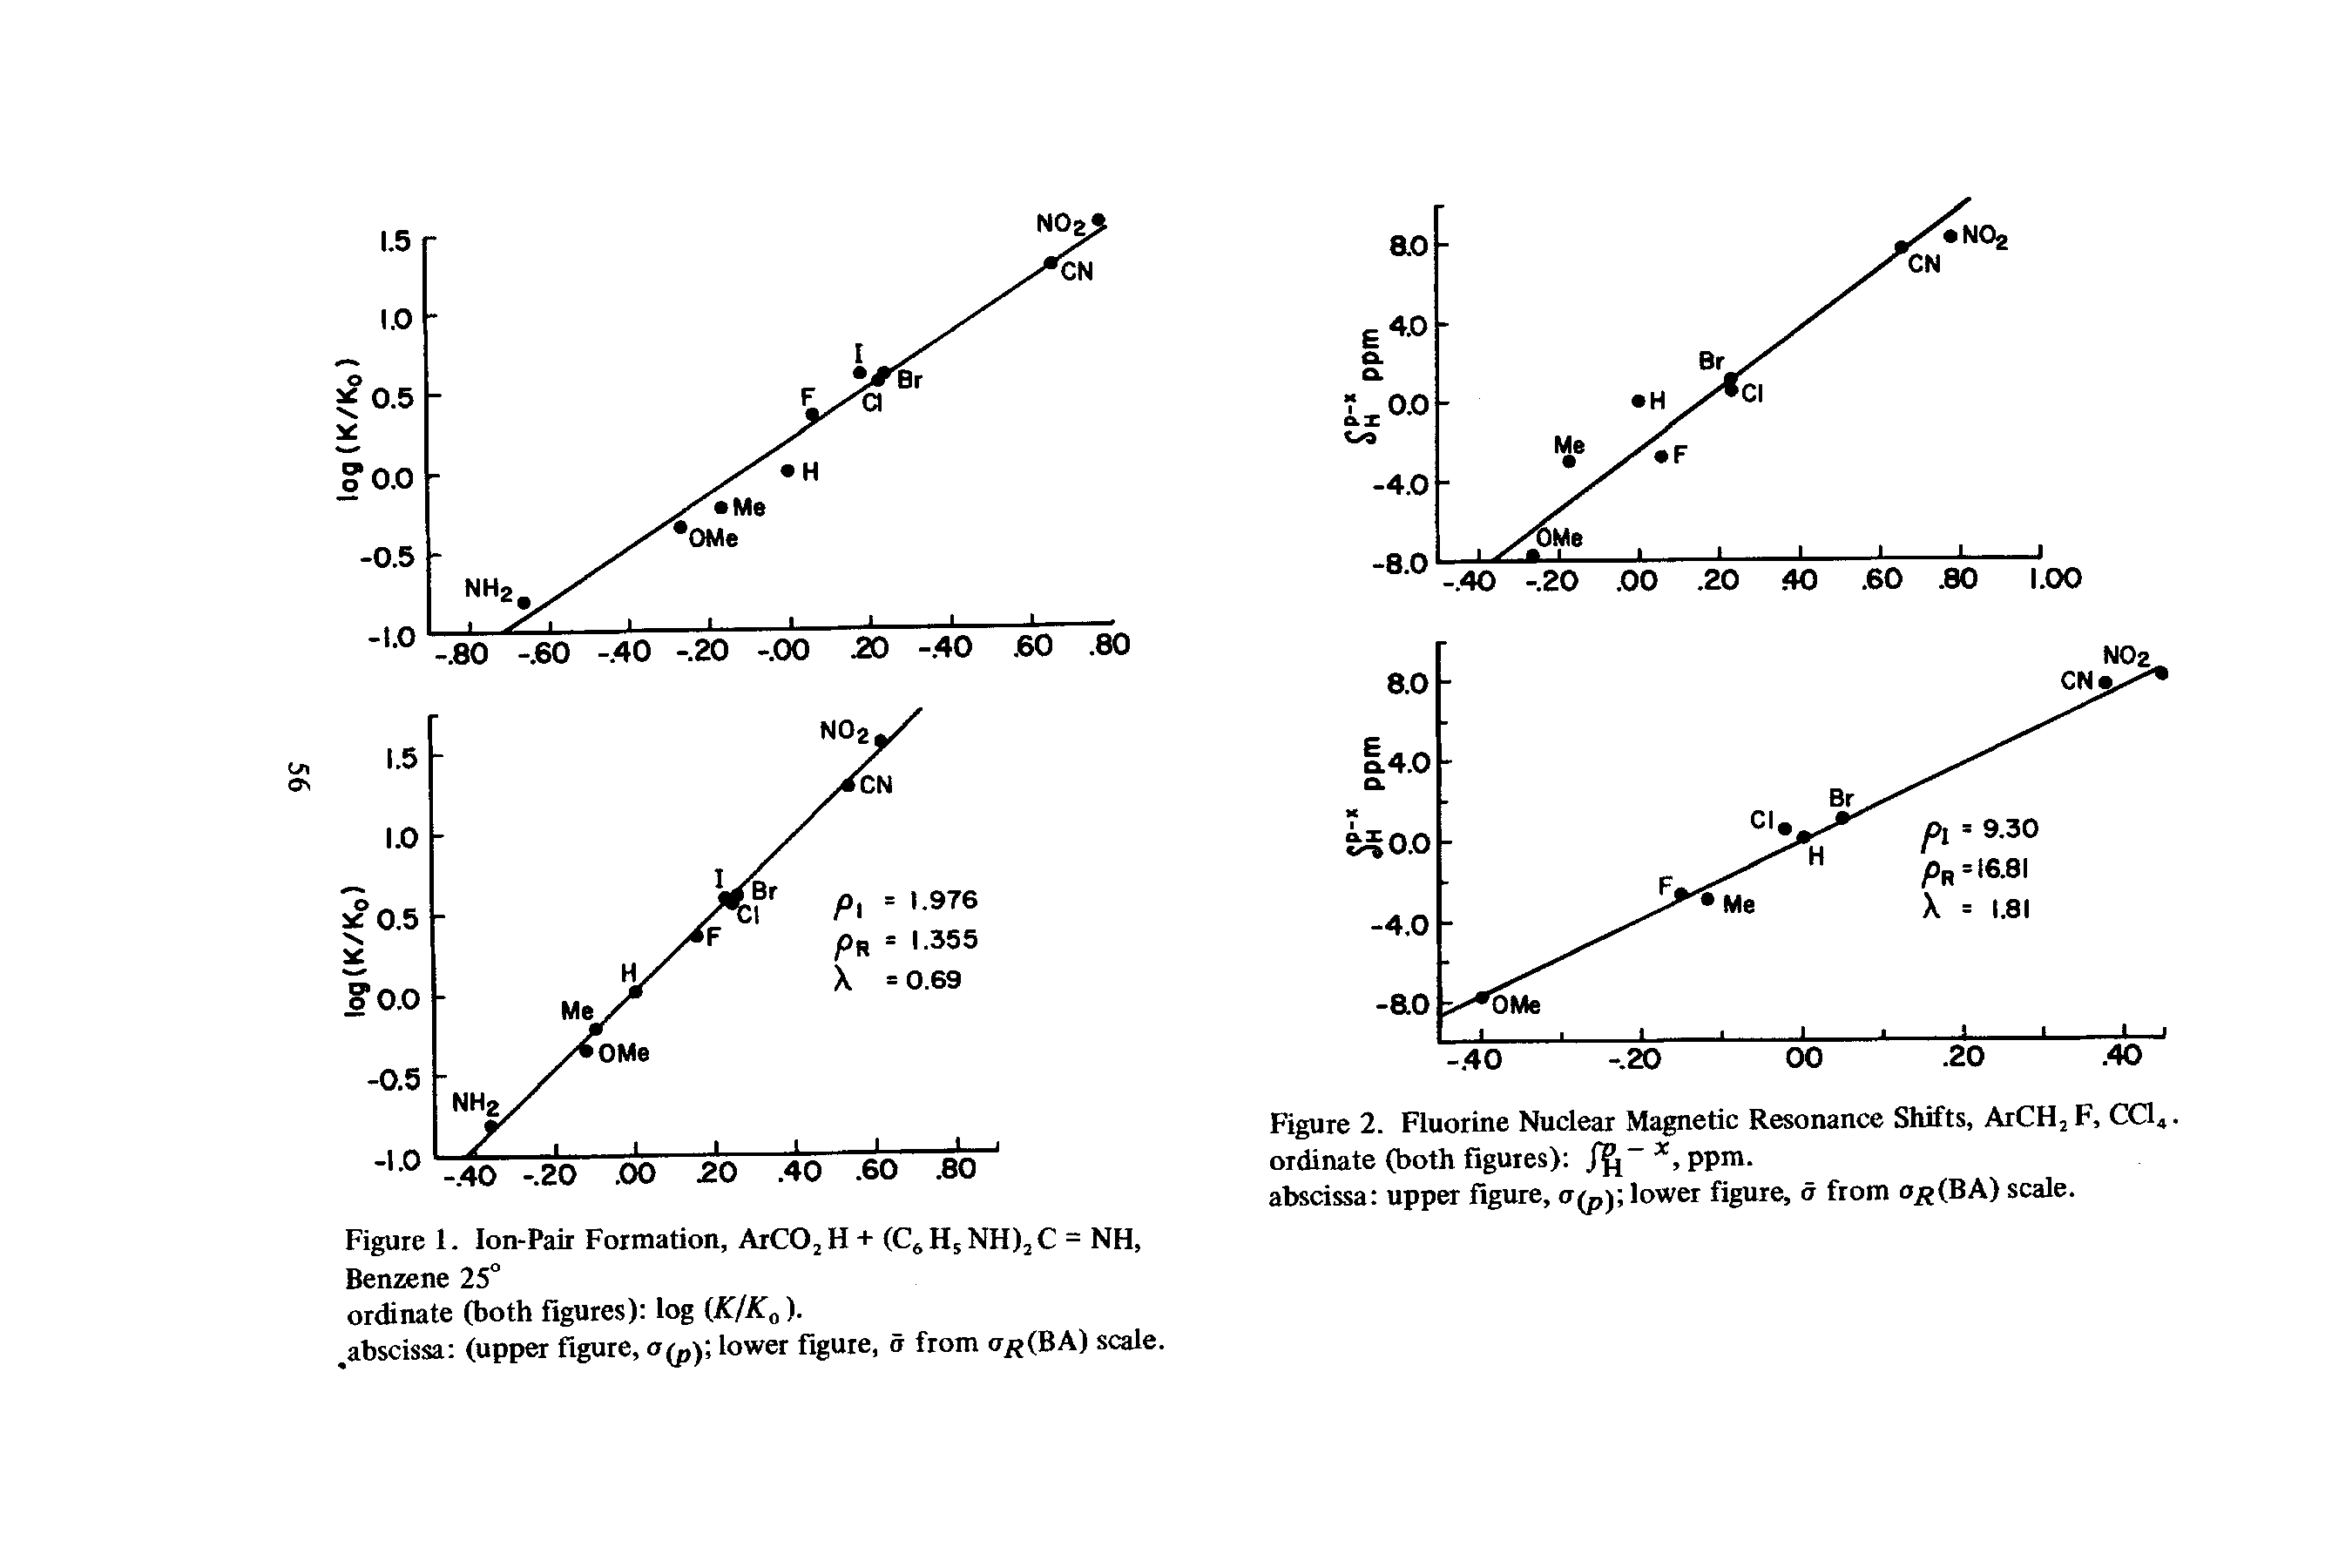 Figure 2. Fluorine Nuclear Magnetic Resonance Shifts, ArCH, F, CCI4. ordinate (both figures) ppm.